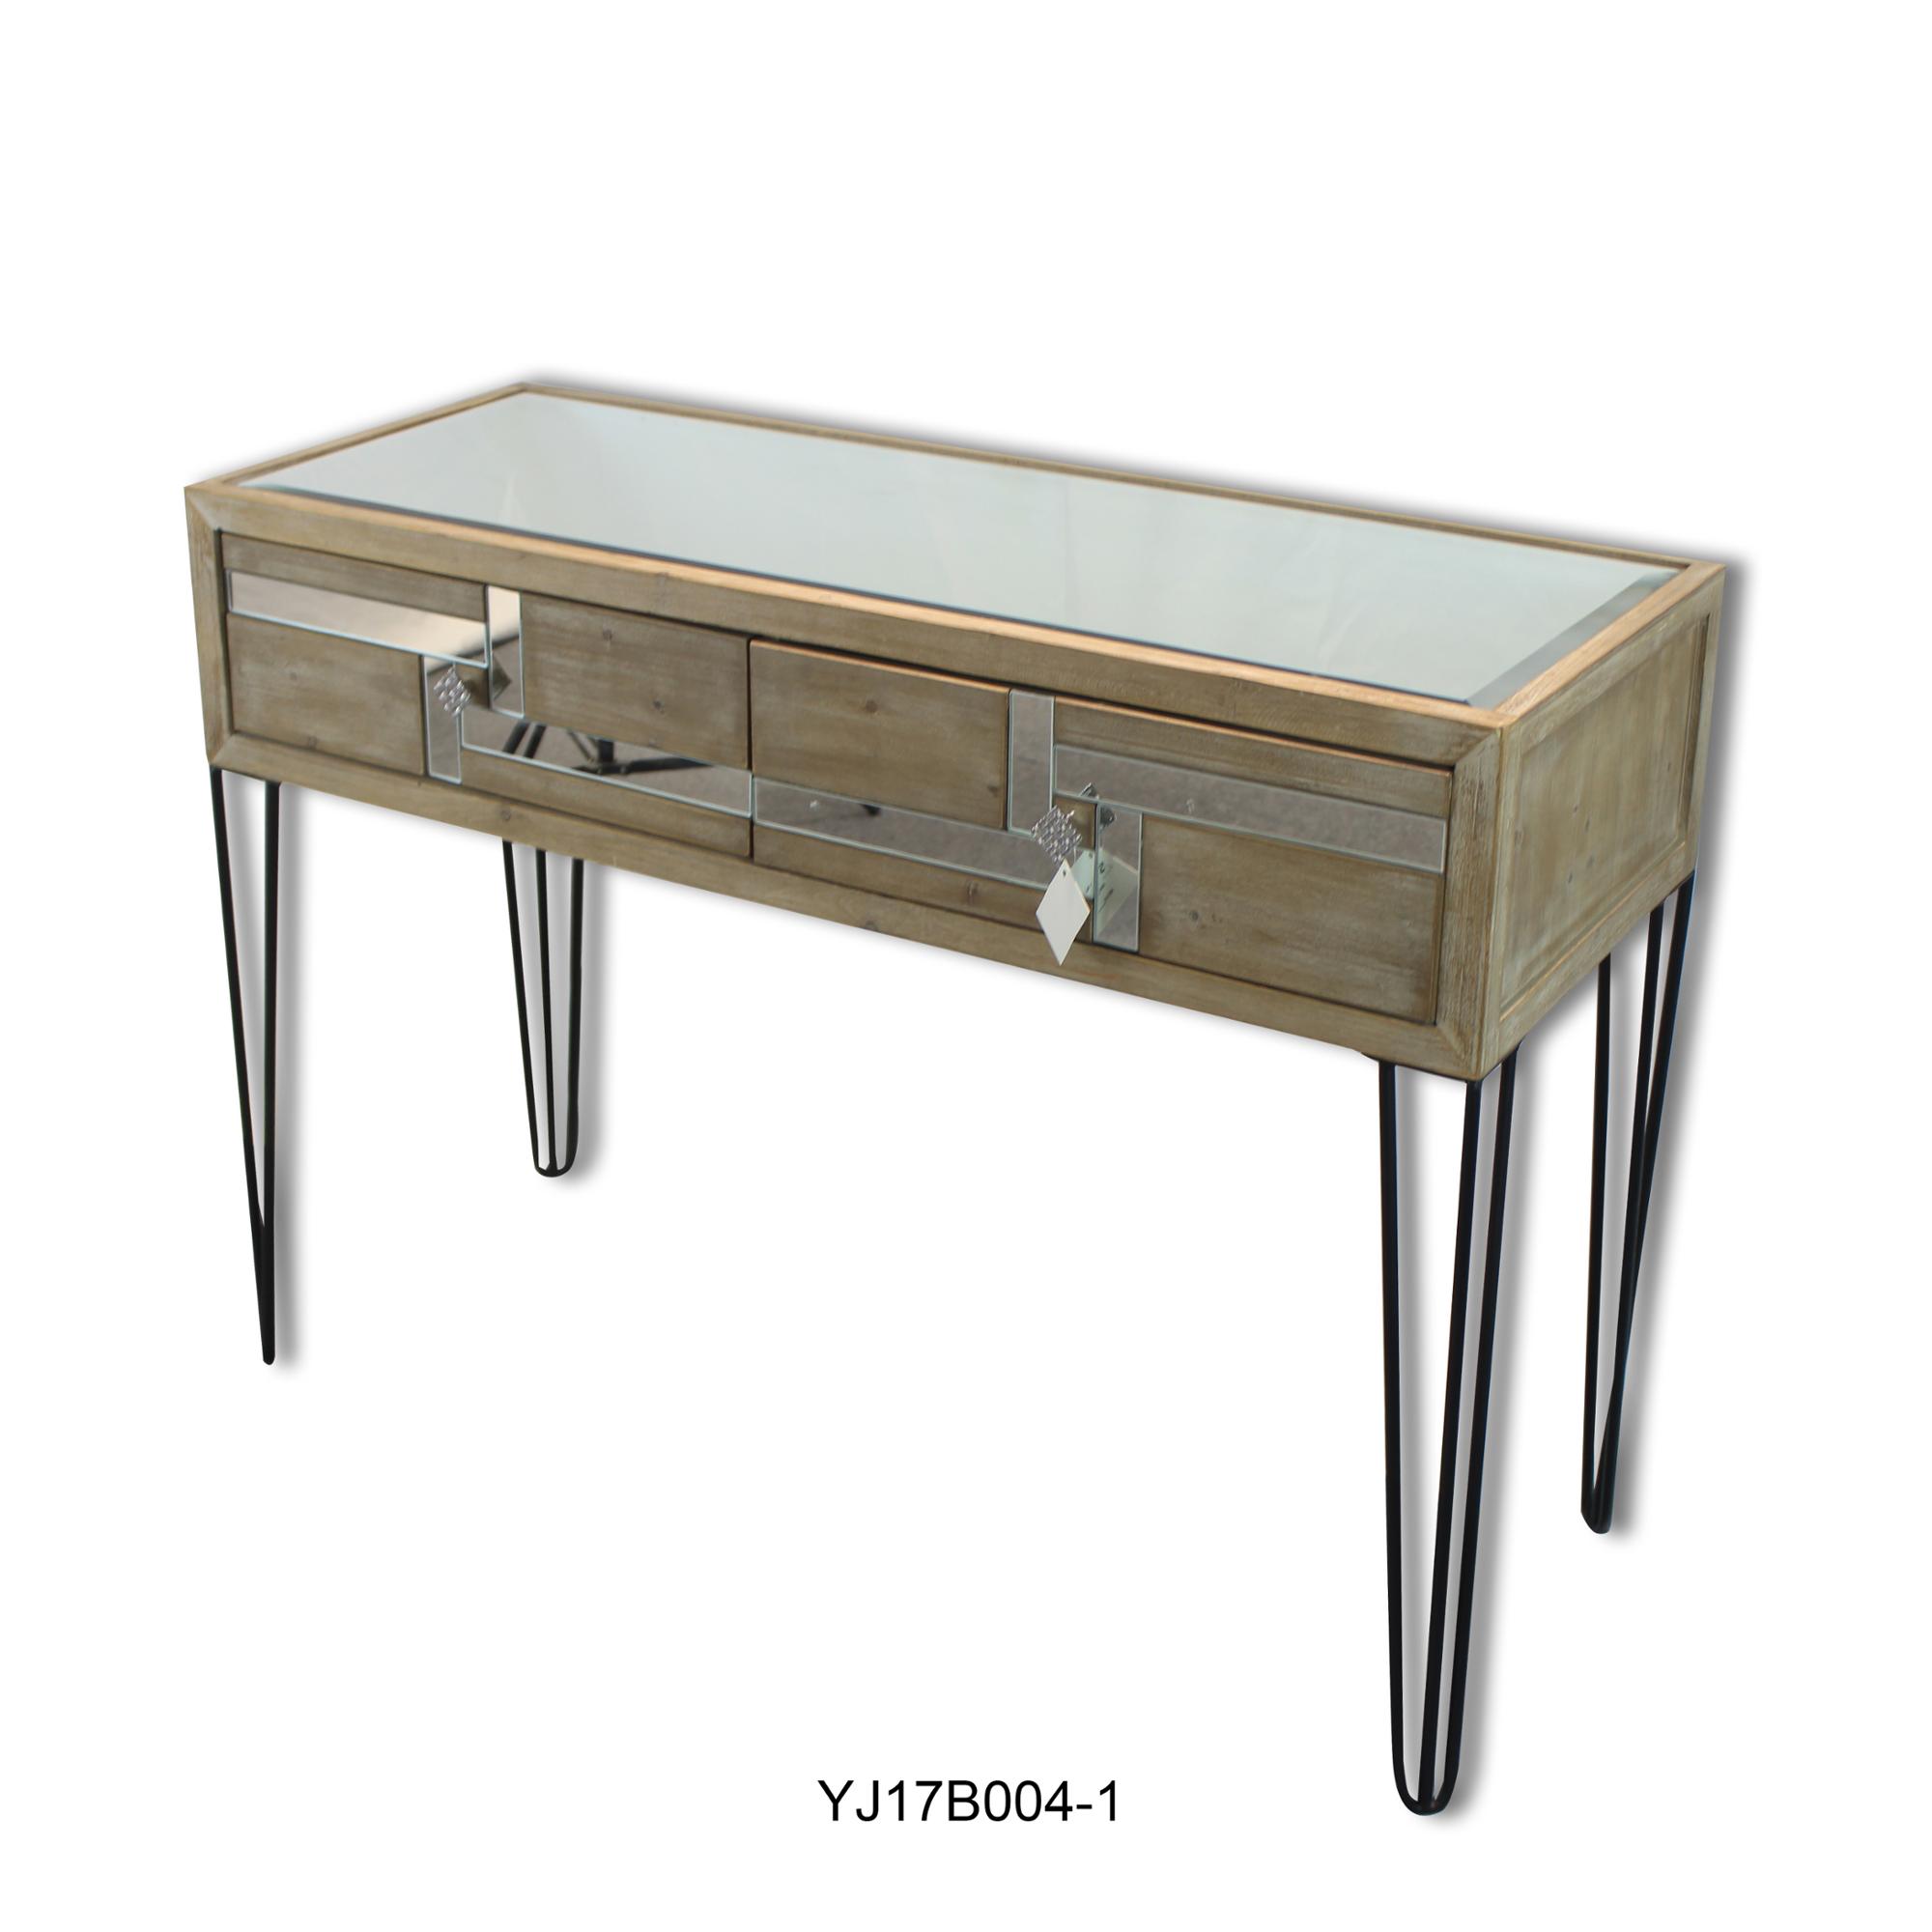 Home furniture mirrored console hallway table